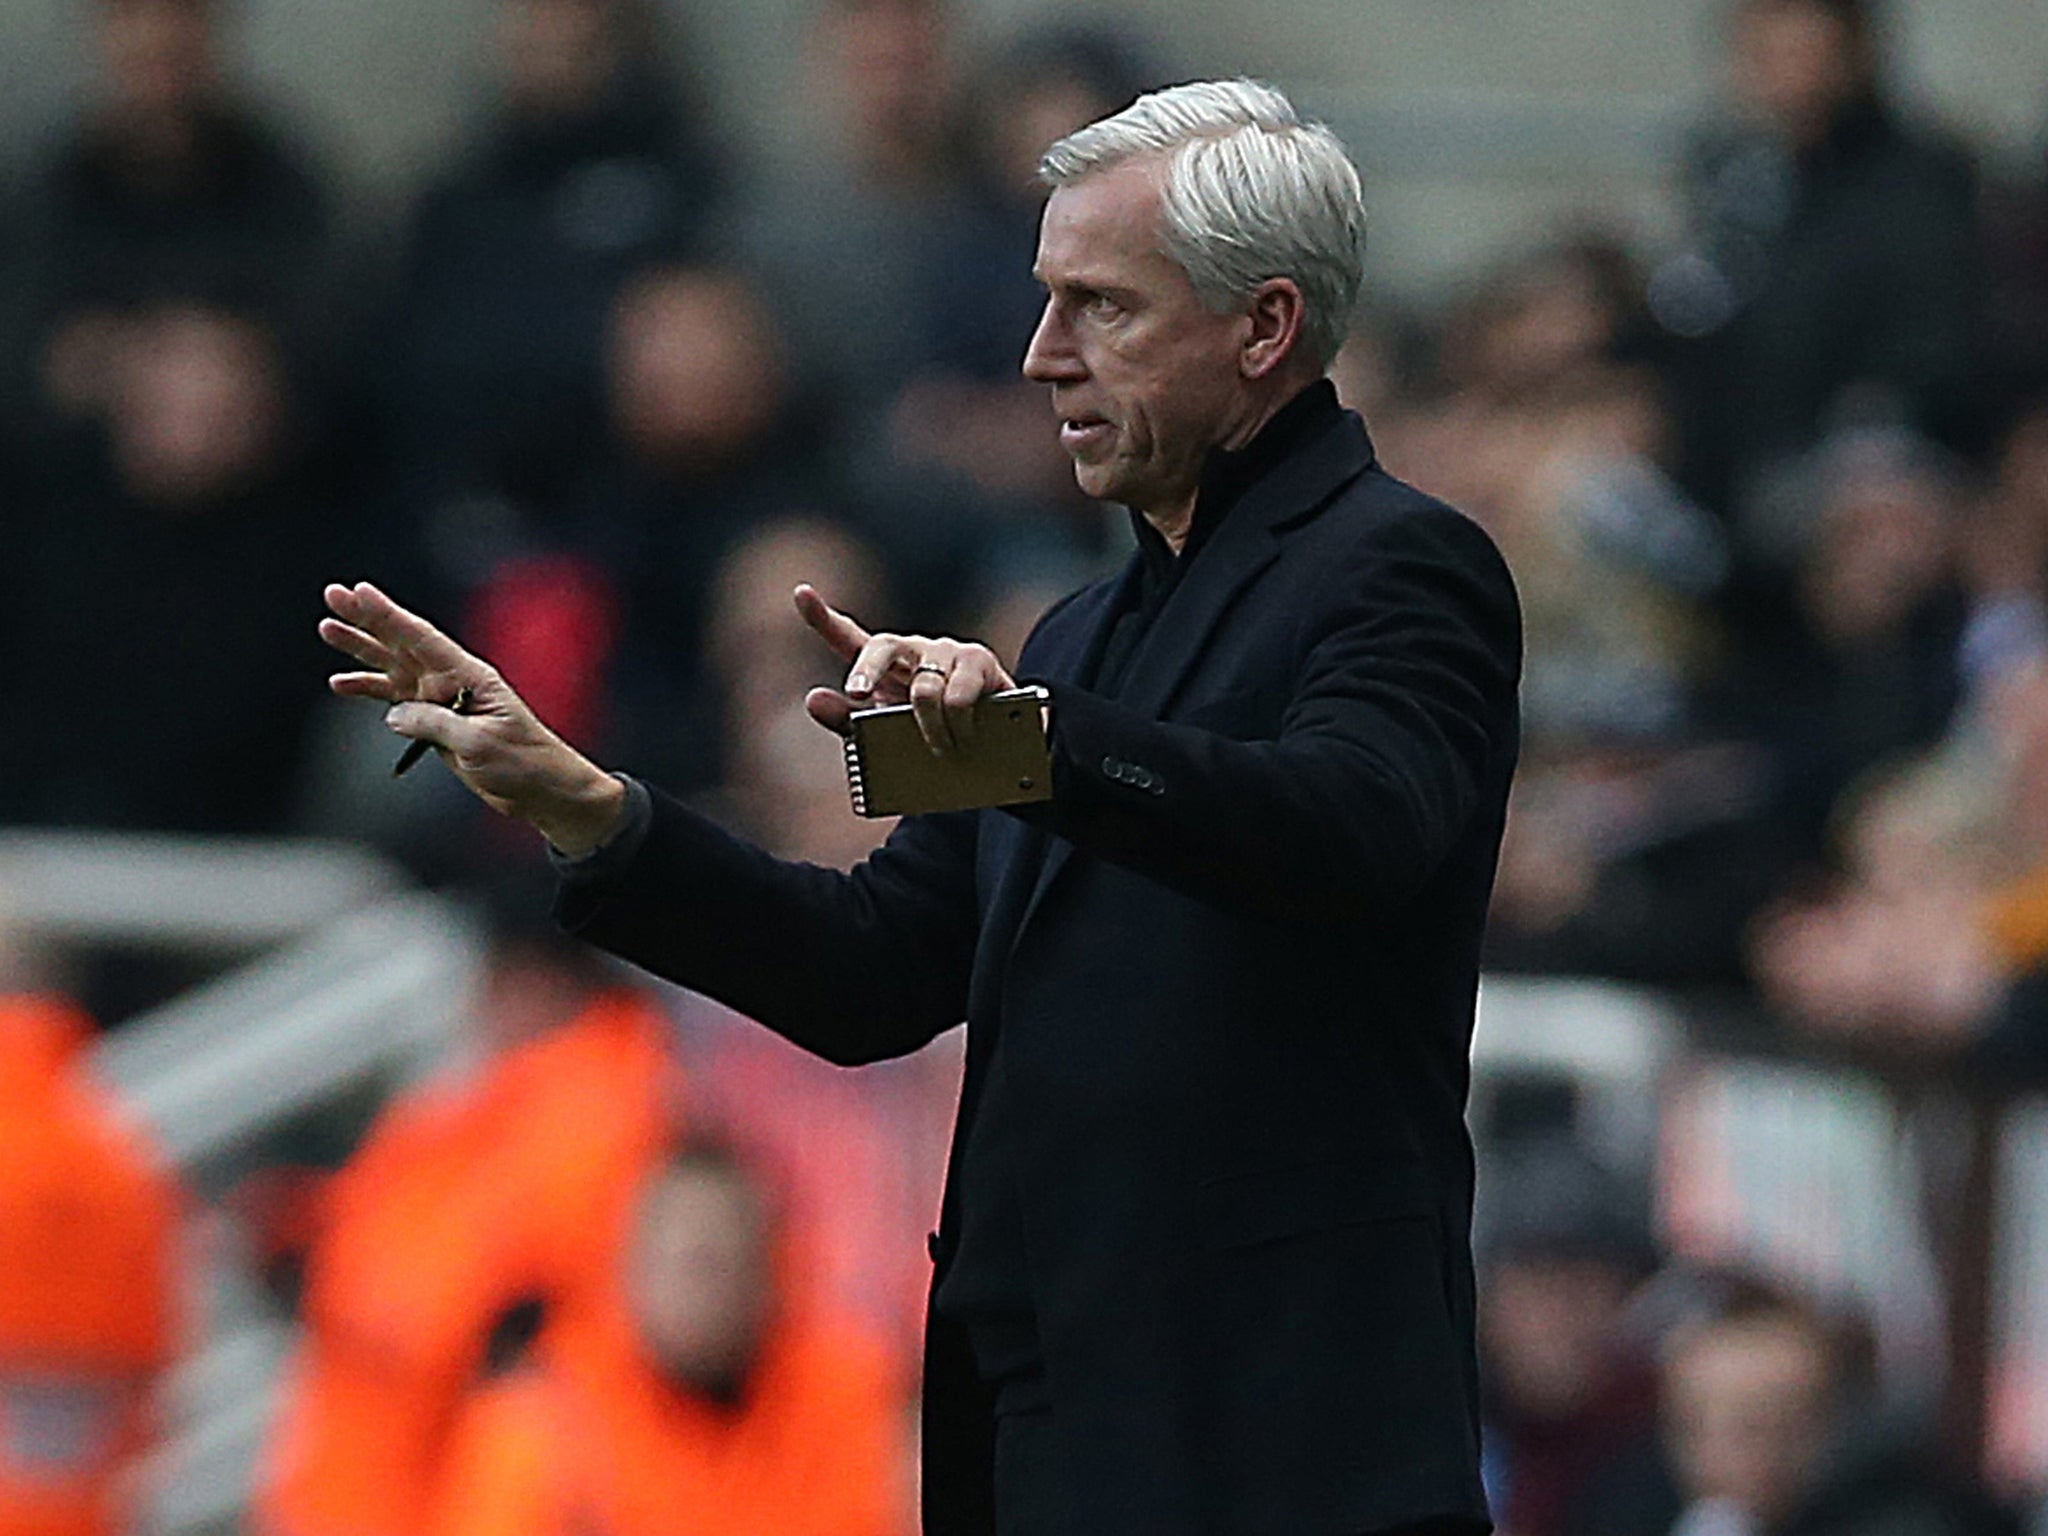 Alan Pardew has praised his side's strength in depth following the 5-1 victory over Stoke